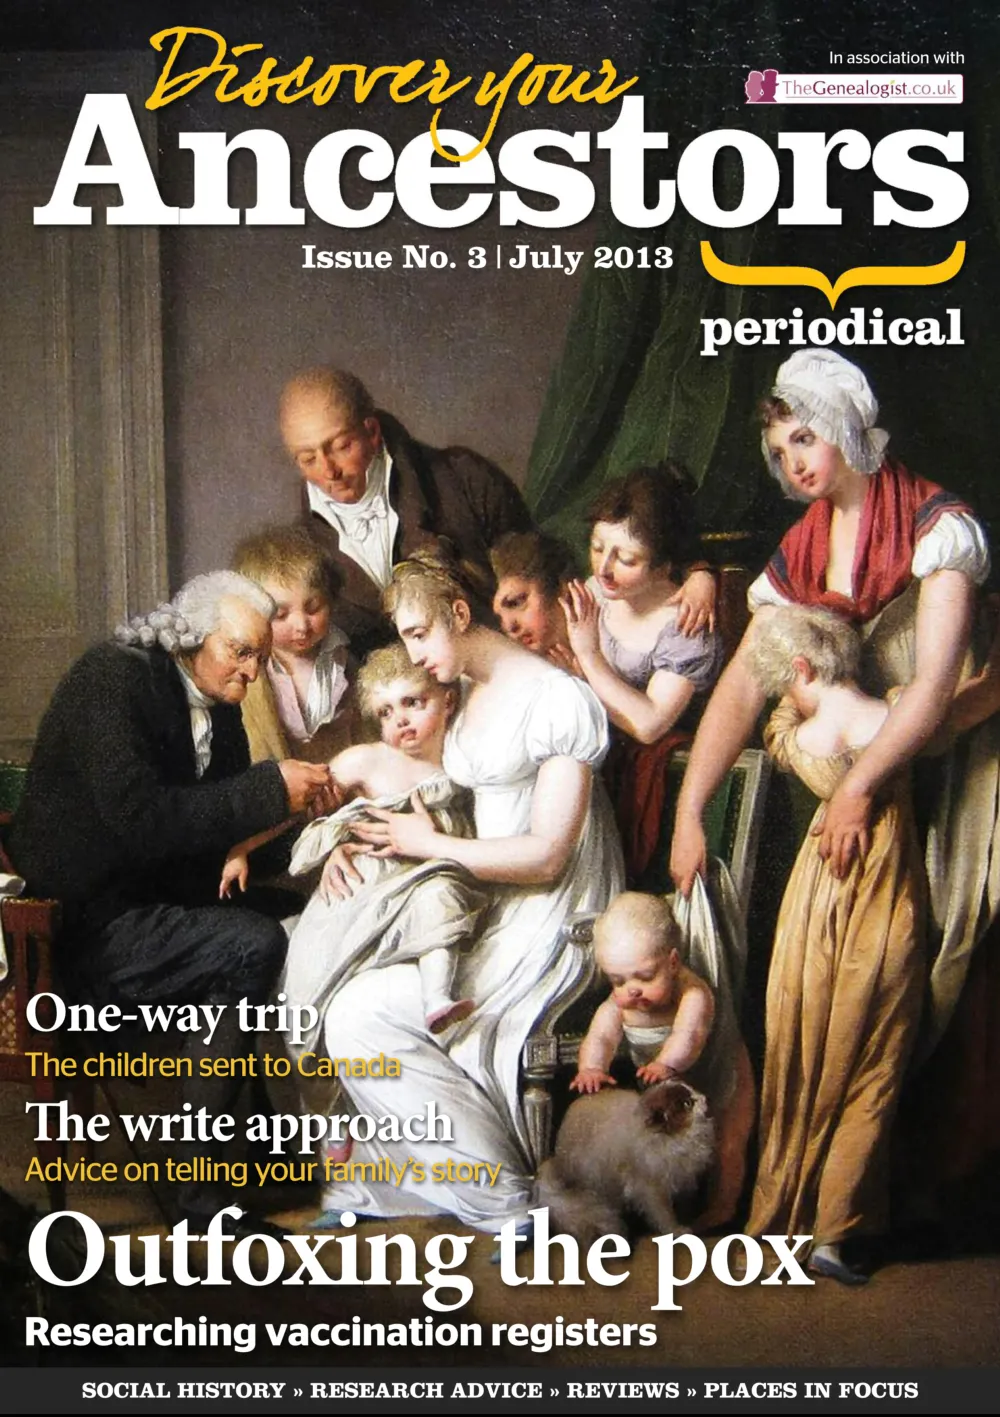 Discover Your Ancestors Periodical - July 2013